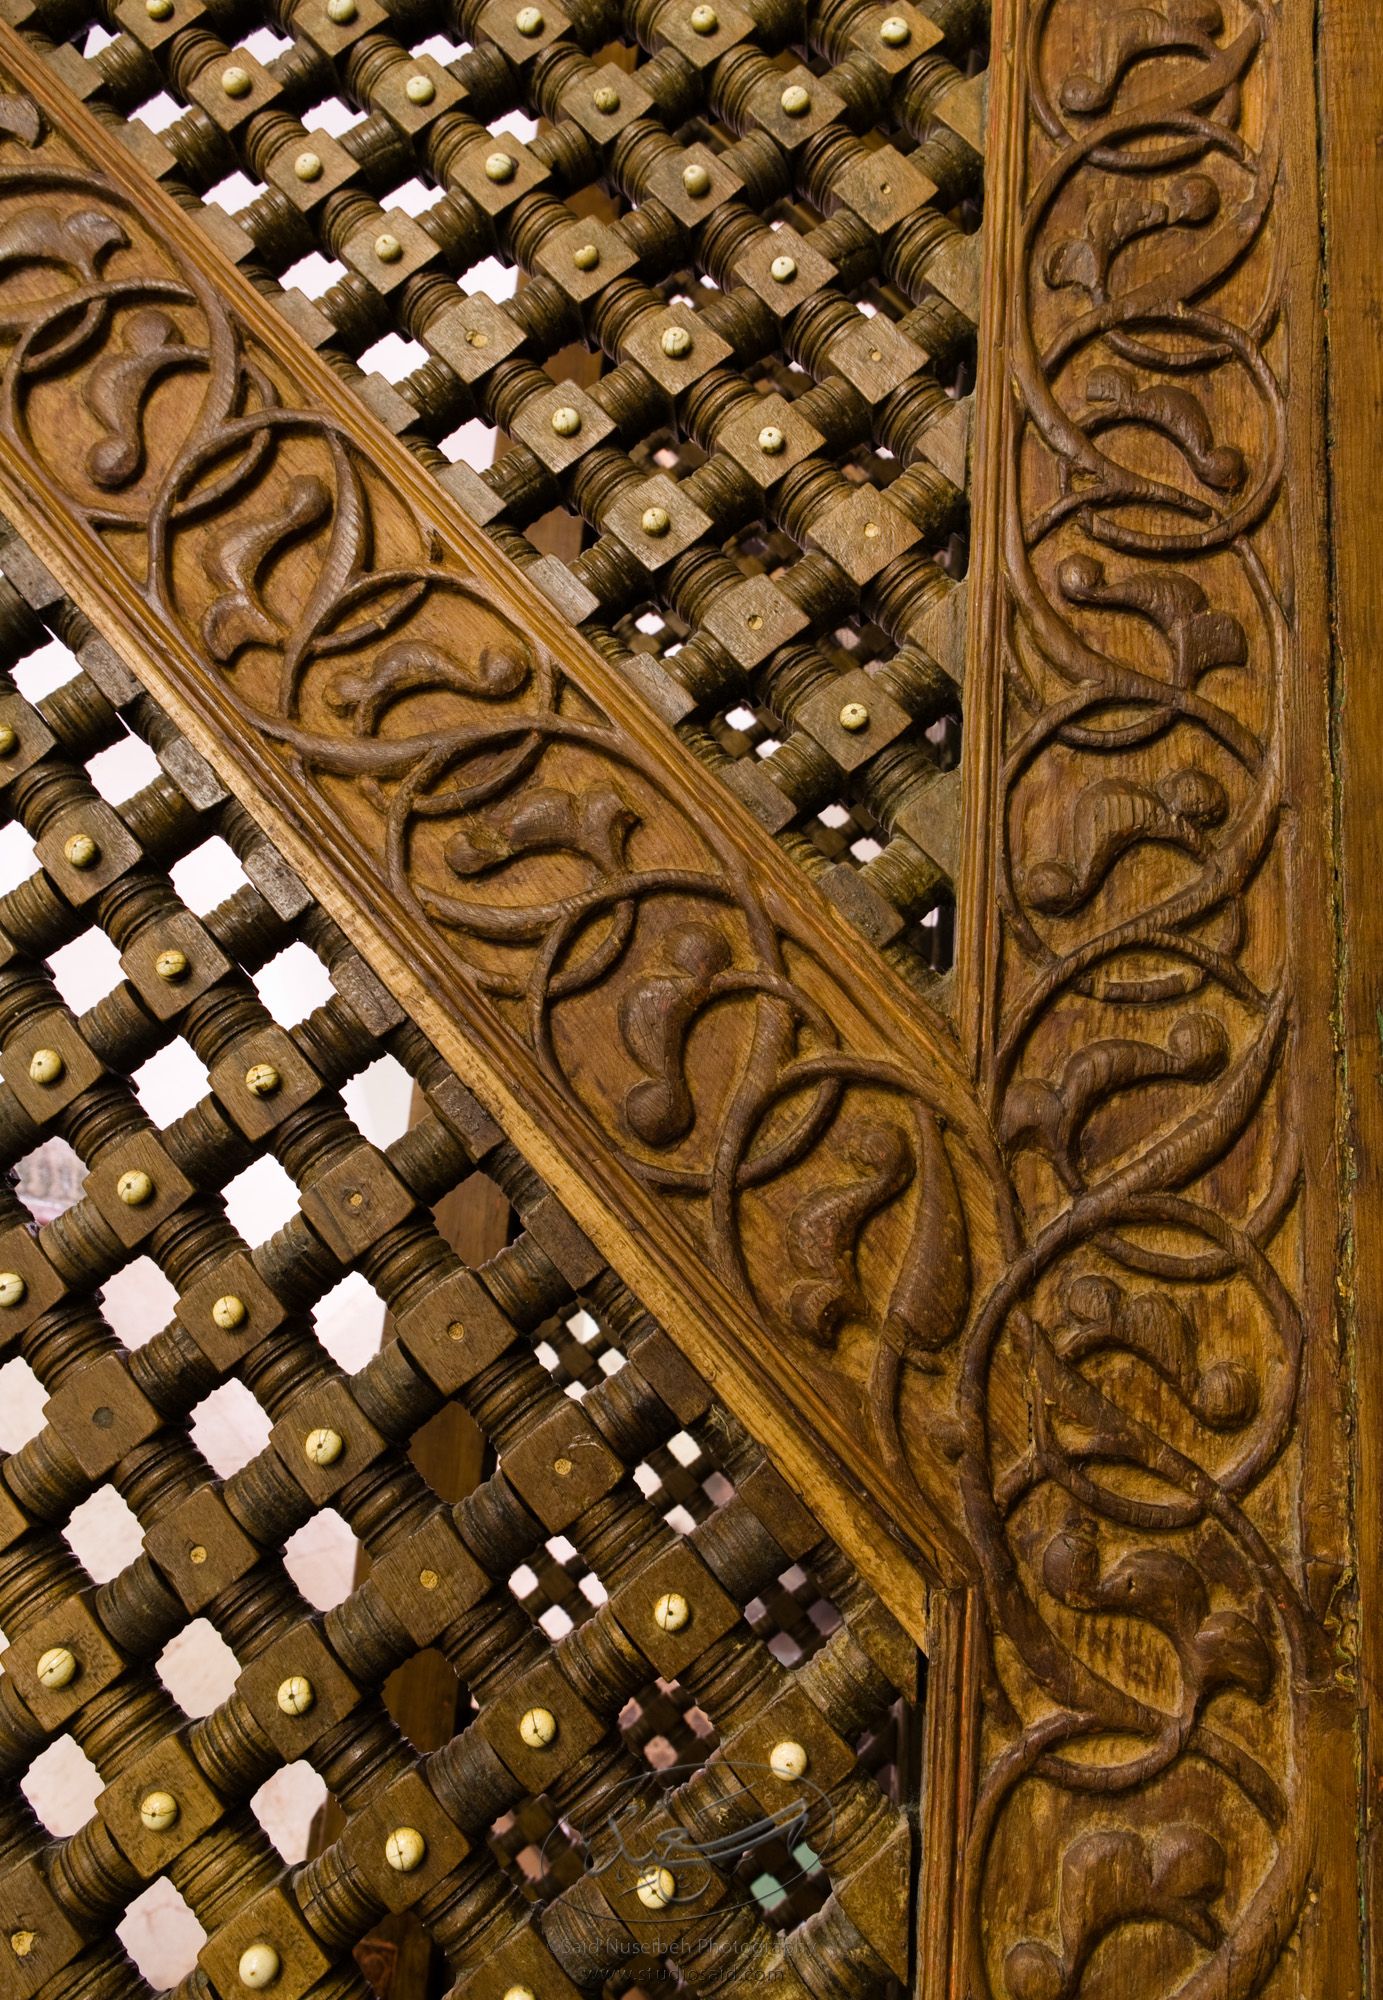 "Mashrabiyya and Floral Interlace. Minbar, Carved Woodwork Detail"The late-13th / early-14th c. Mamluk minbar, or pulpit, of Sultan al-Nasir Muhammad, the ninth Mamluk Sultan from Cairo and son of Qalawun. The minbar was located in the Umayyad Mosque in Aleppo, Haleb, prior to its damage and disappearance in May 2013.